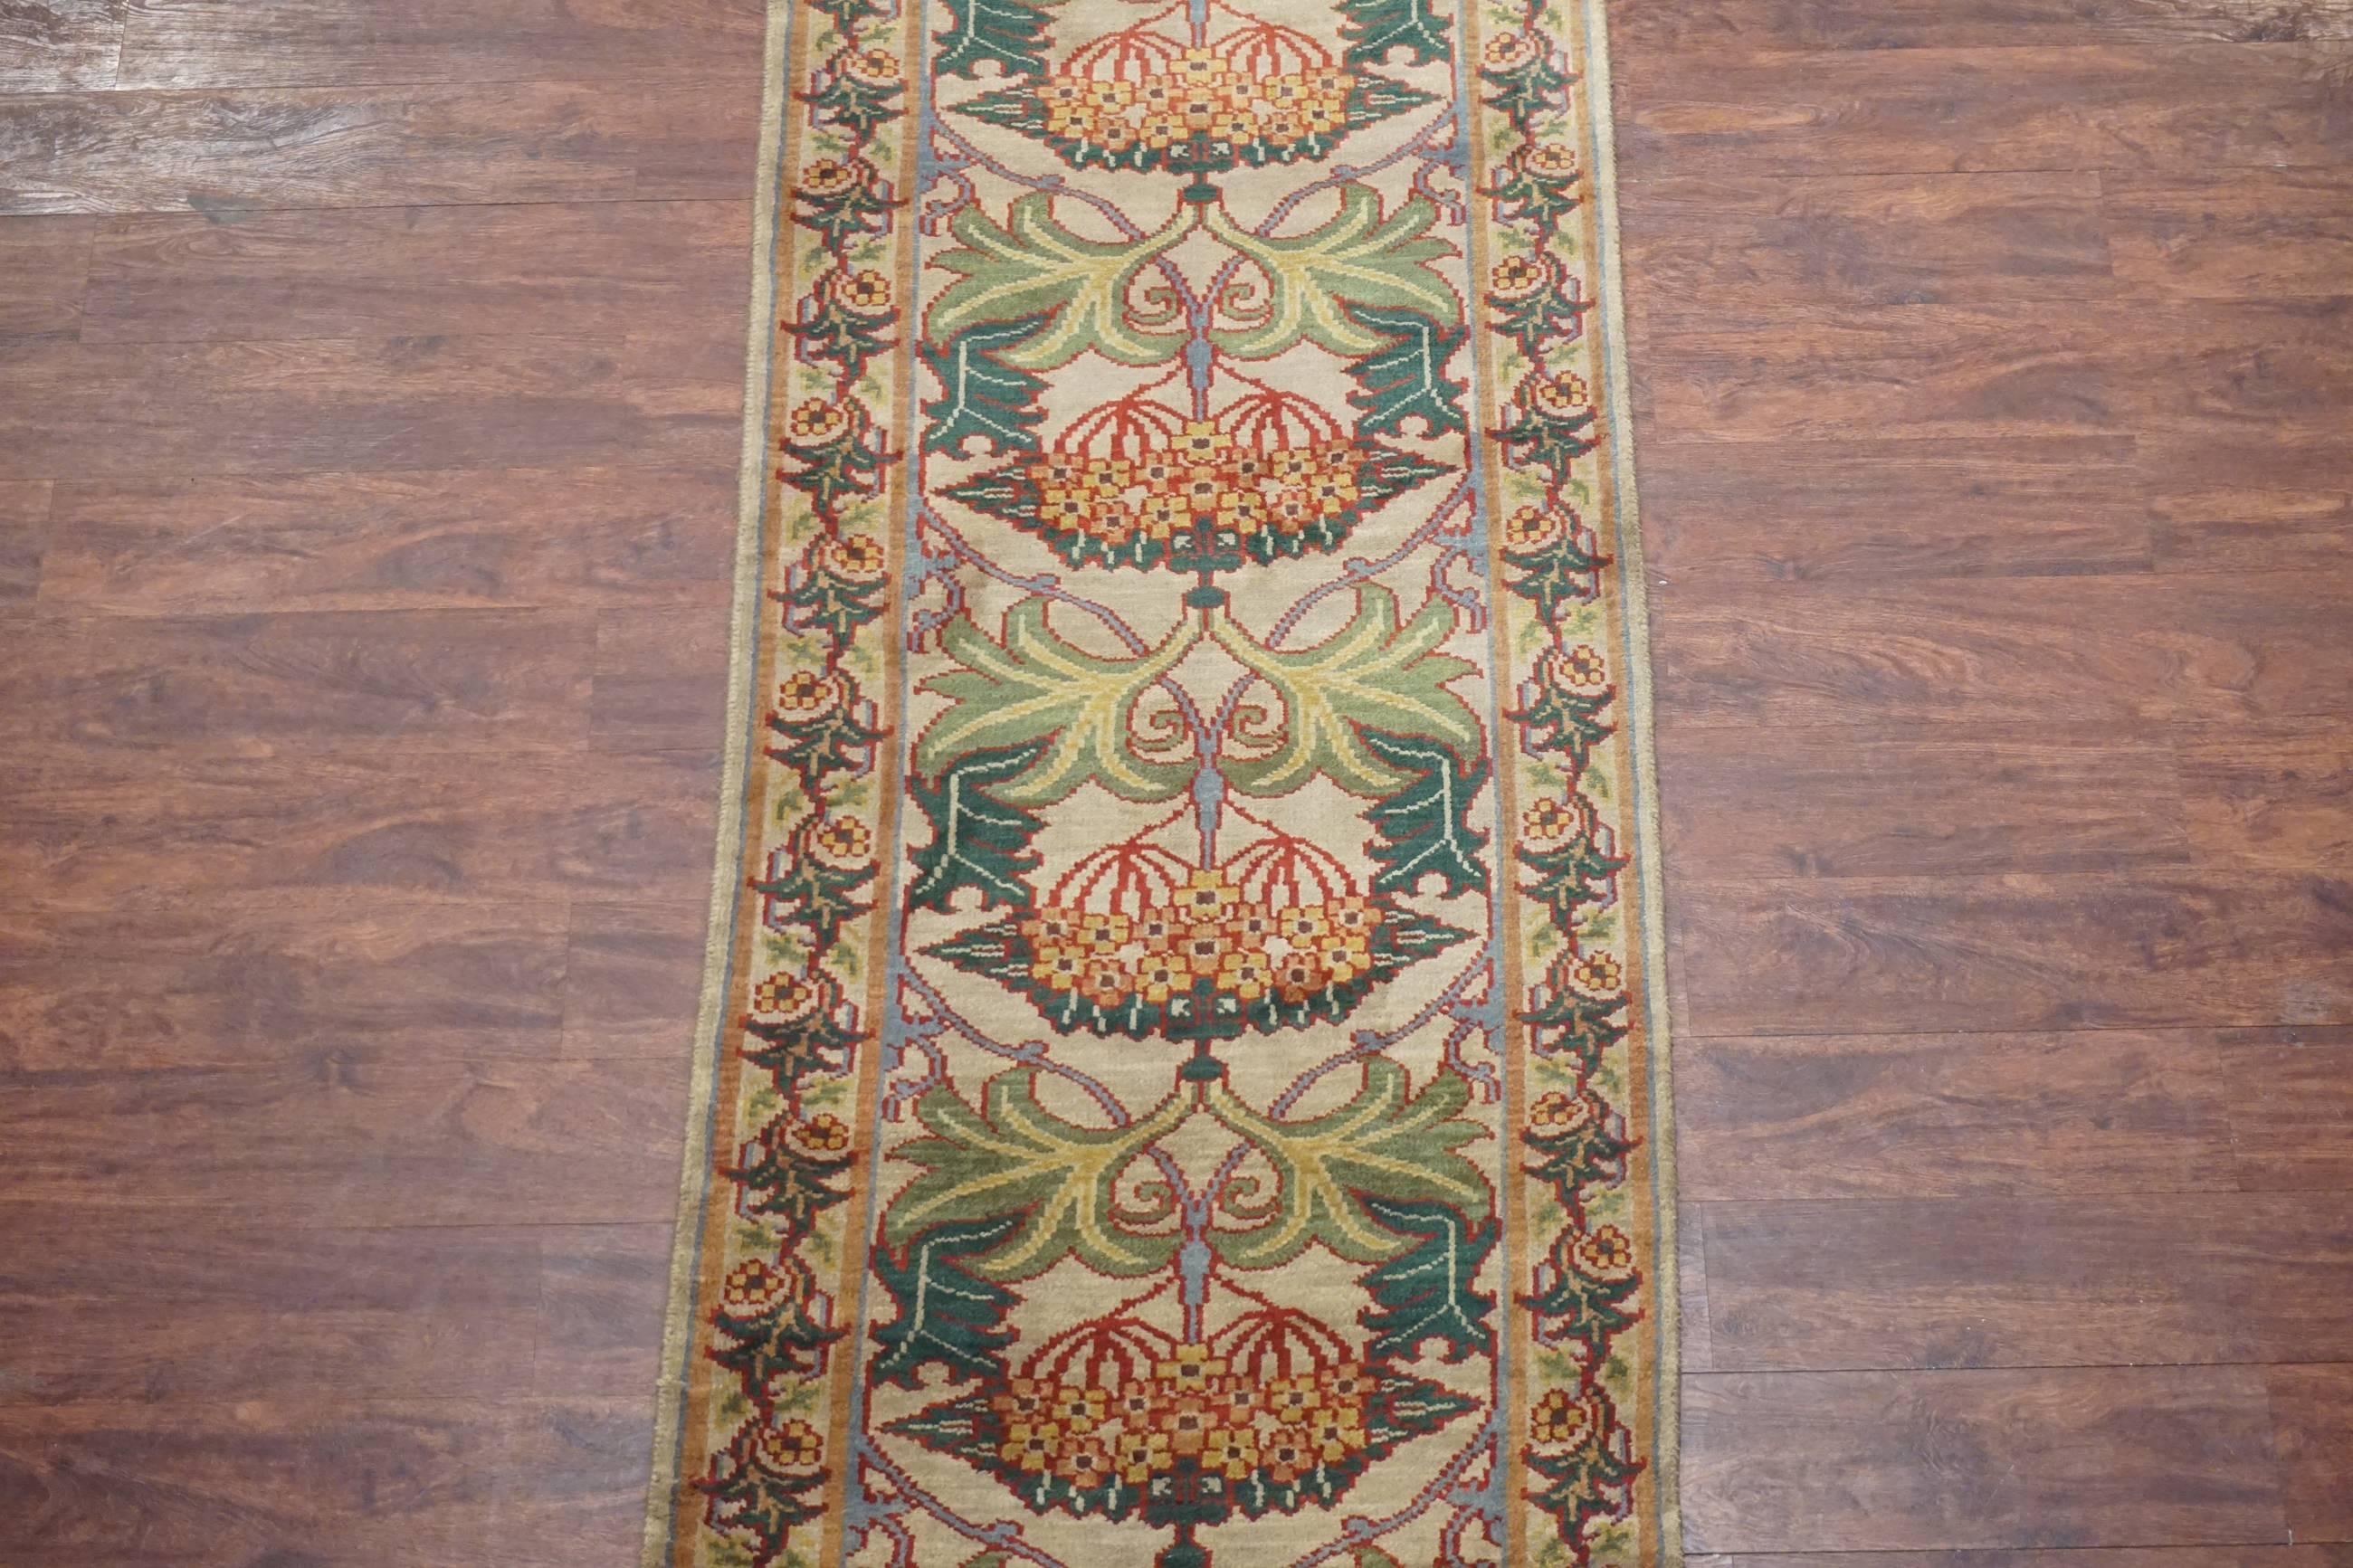 William Morris hand-knotted Arts & Crafts runner

circa 1990

Measures: 2' 7